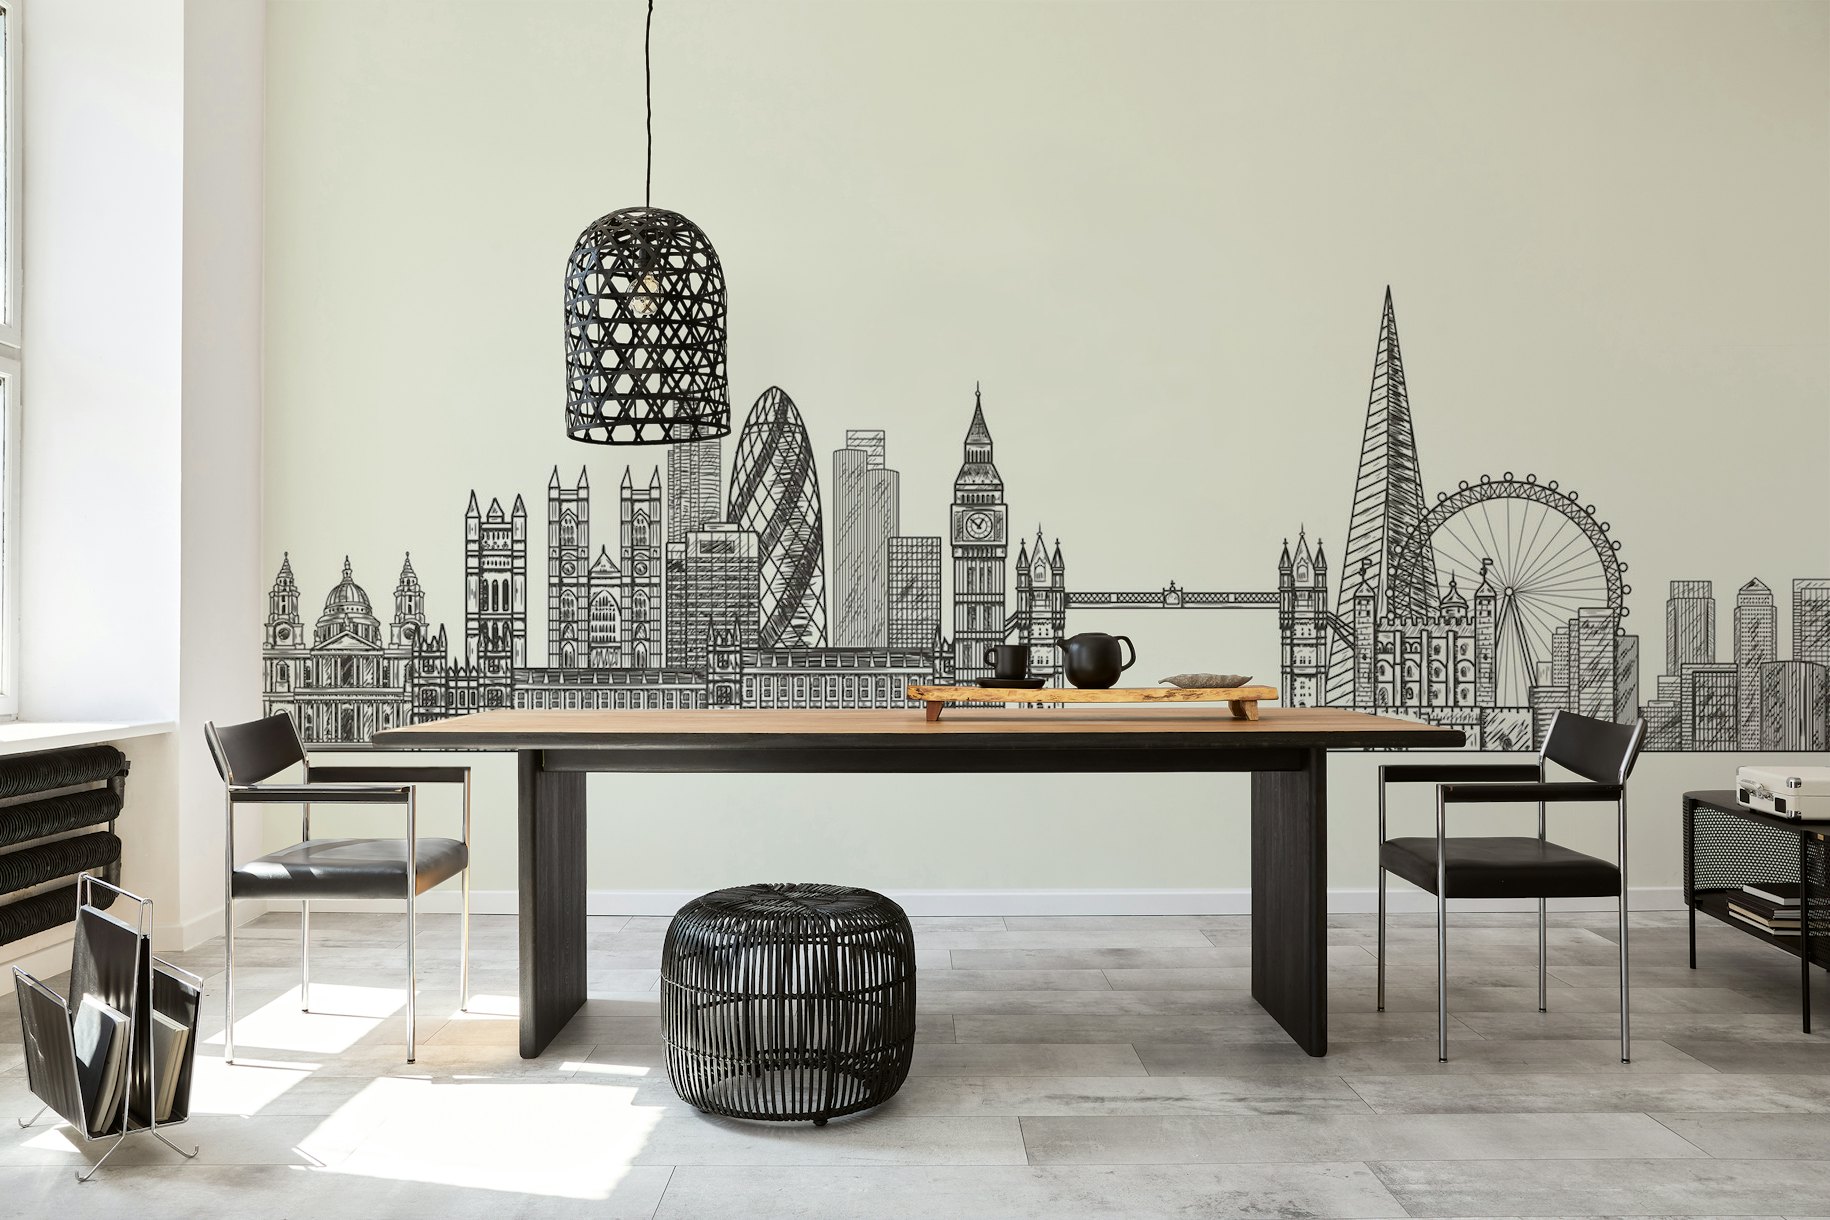 Black and white London skyline wallpaper featuring iconic landmarks